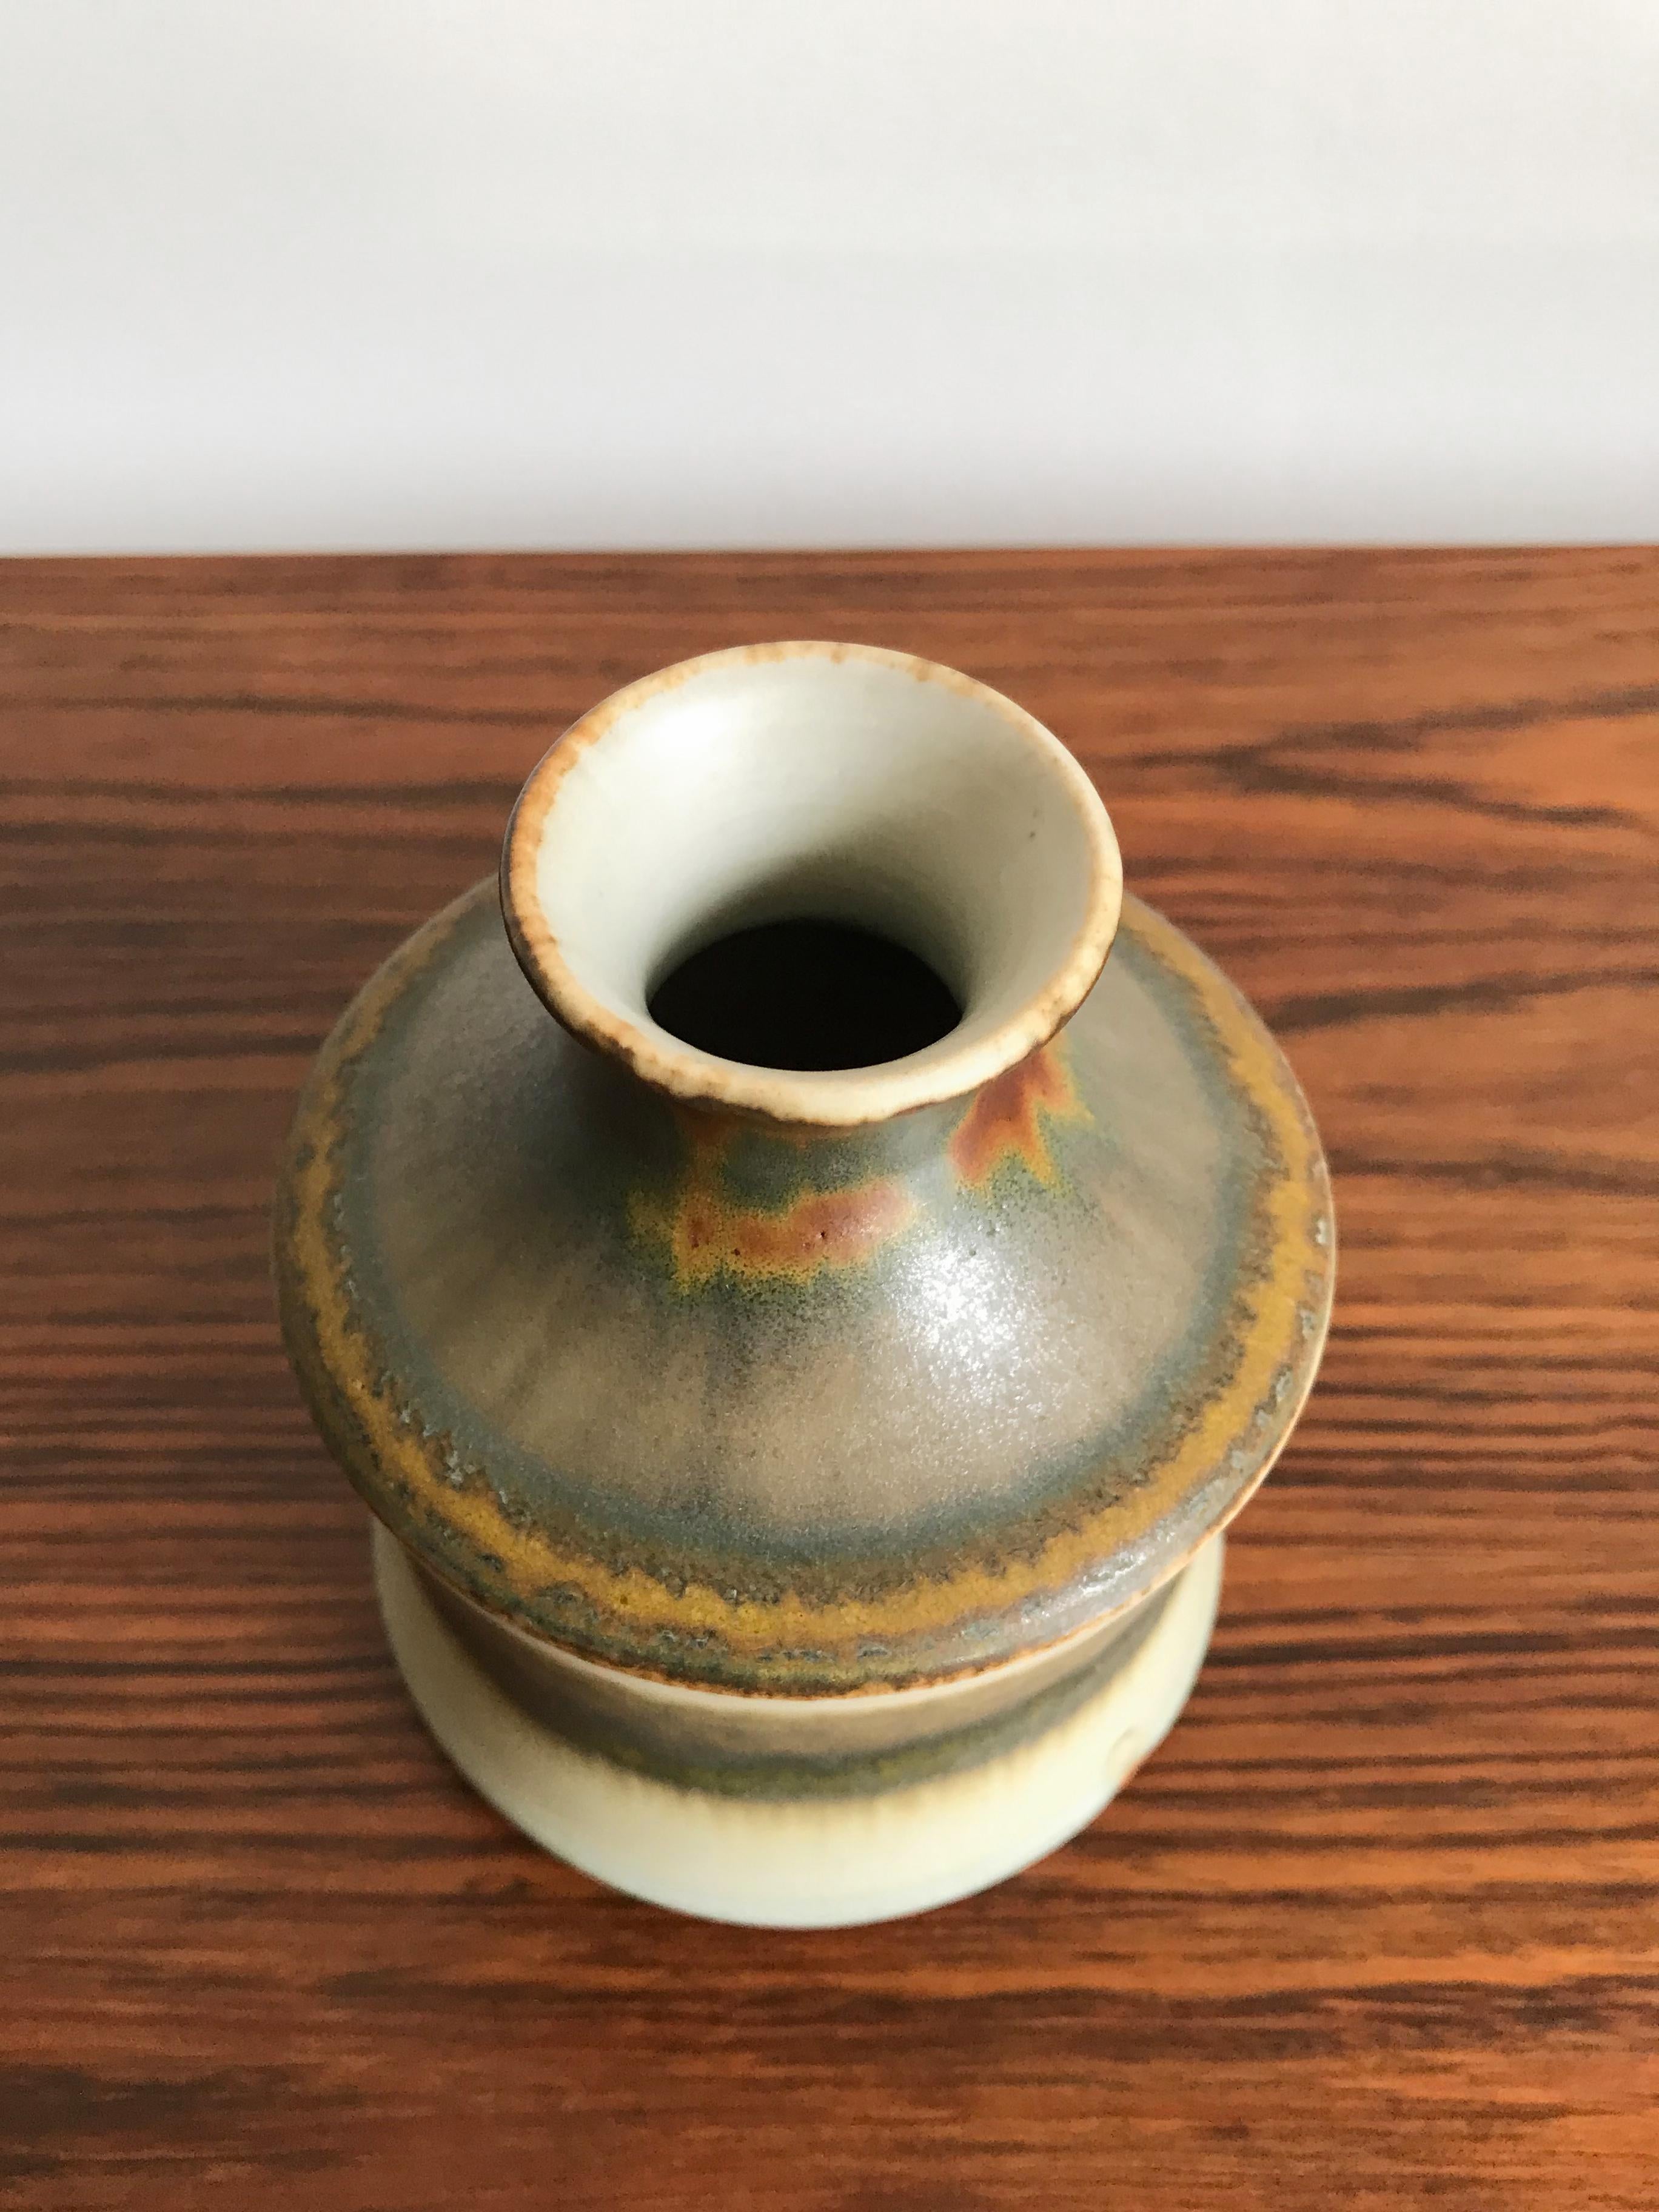 Scandinavian midcentury modern design ceramic vase designed by John Andersson for Höganäs Stengods, Sweden 1960s. Mark under the base.

Please note that the item is original of the period and this shows normal signs of age and use.